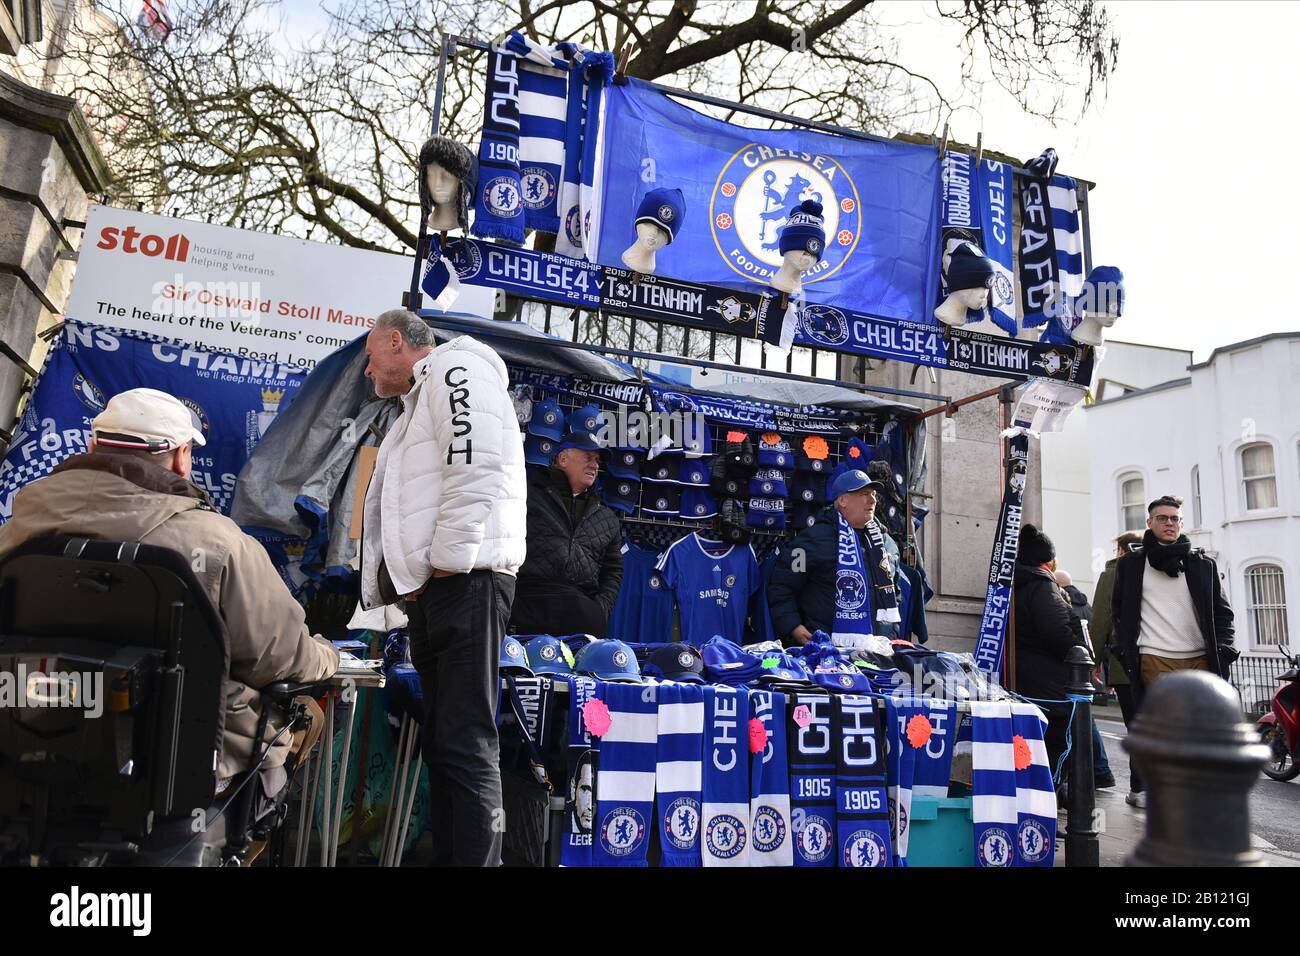 London, UK. 22nd Feb, 2020. Merchandise shop during the Premier League match between Chelsea and Tottenham Hotspur at Stamford Bridge, London on Saturday 22nd February 2020. (Credit: Ivan Yordanov | MI News)Photograph may only be used for newspaper and/or magazine editorial purposes, license required for commercial use Credit: MI News & Sport /Alamy Live News Stock Photo